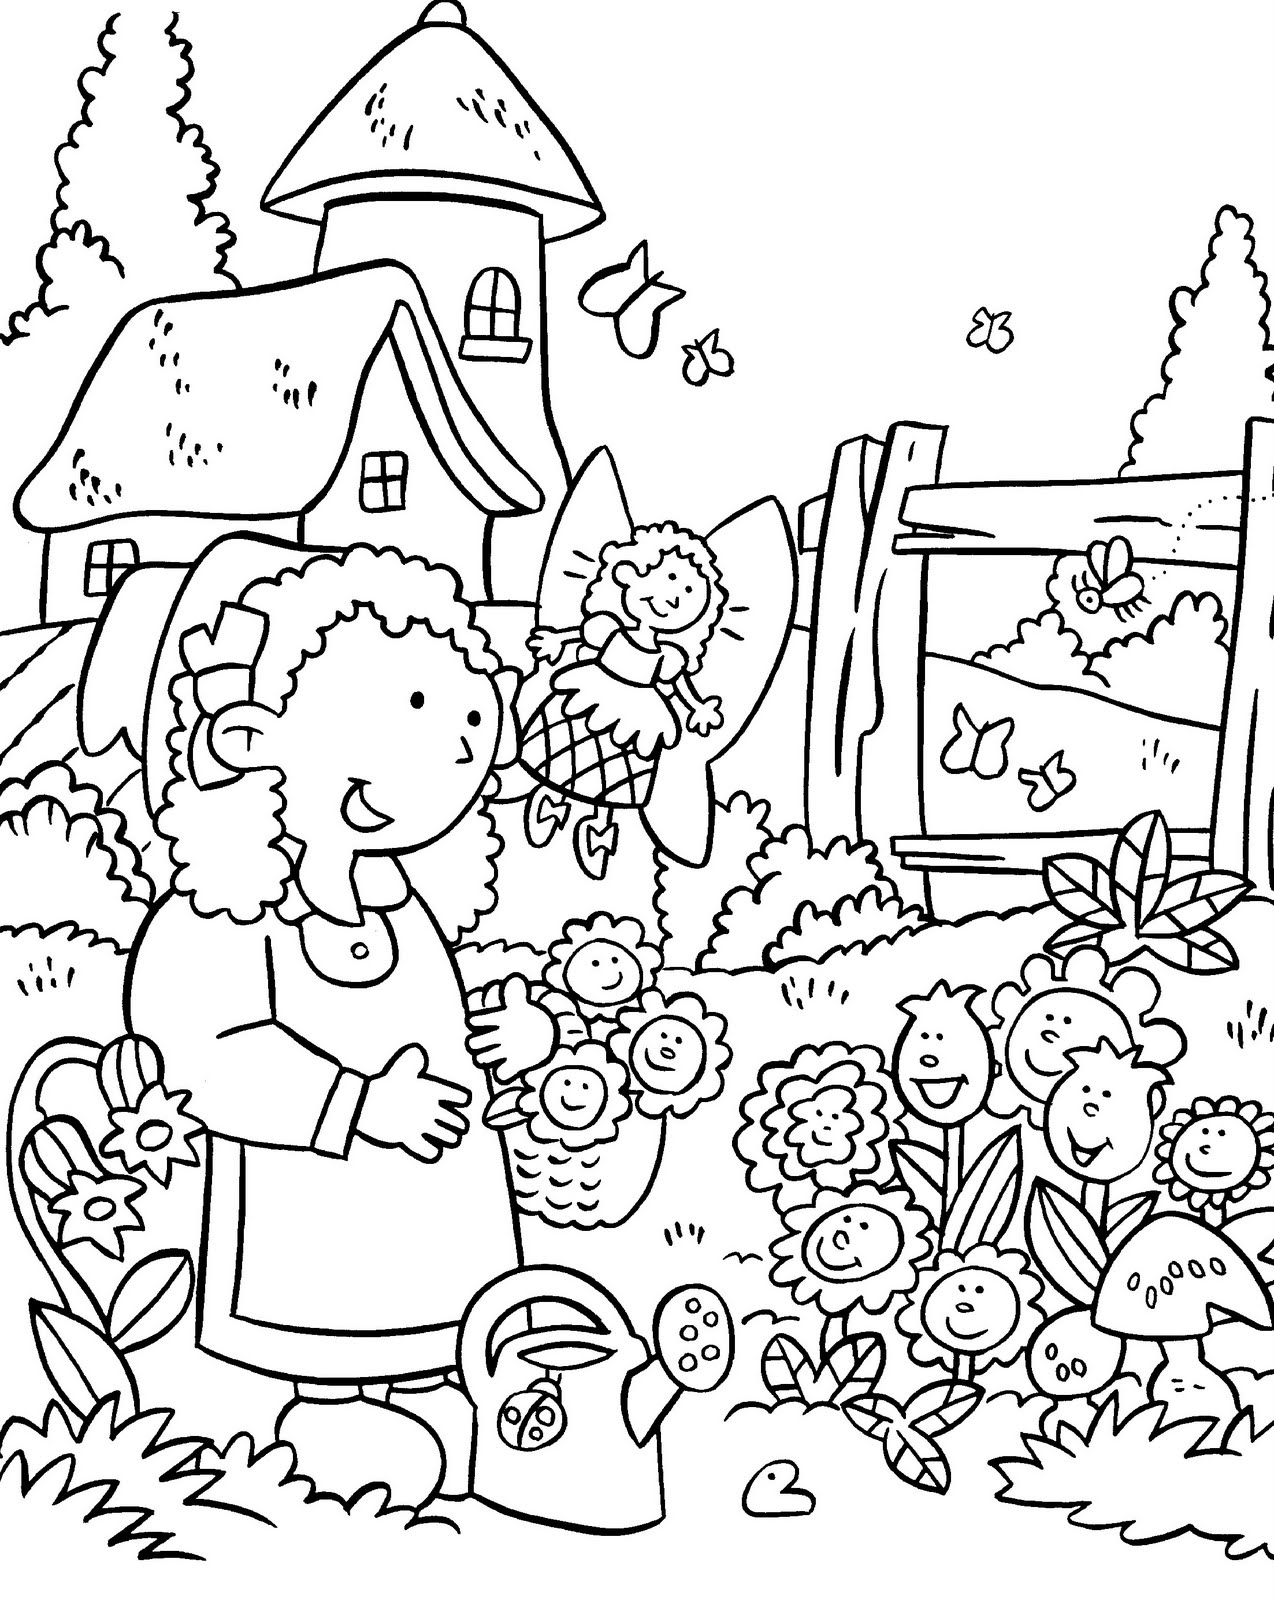 72 Coloring Pages Of Flower Gardens Pictures